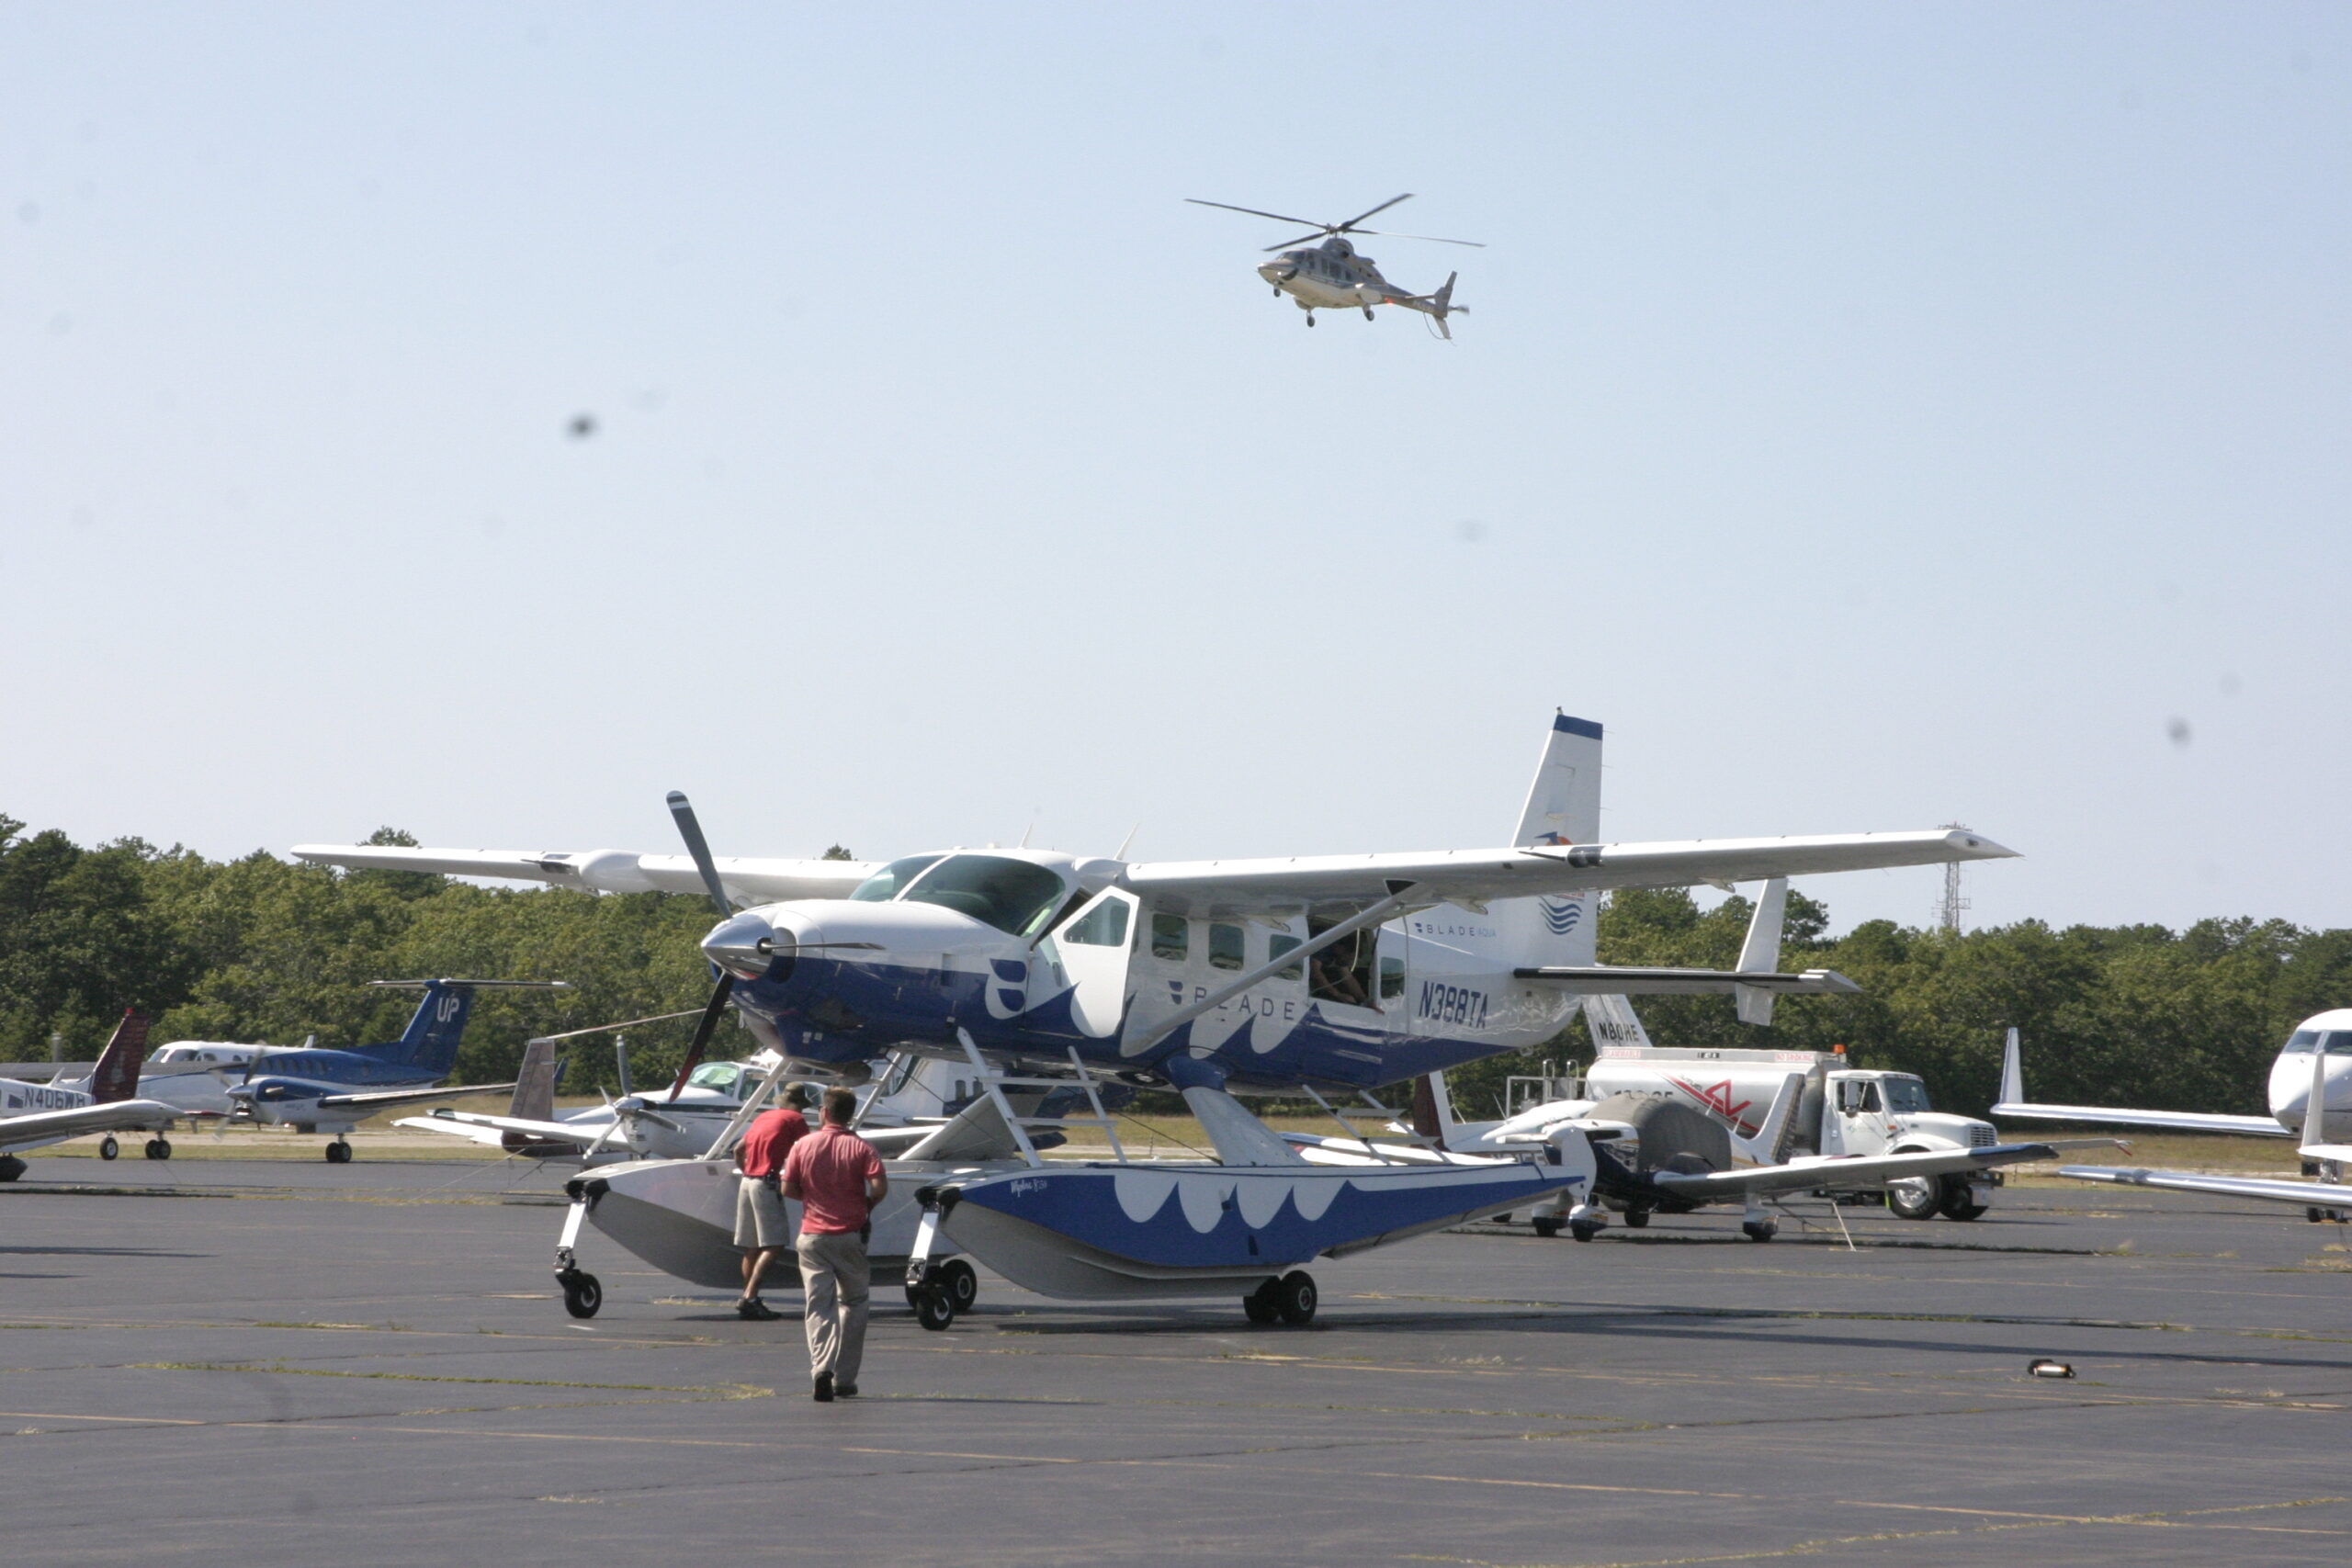 East Hampton Airport could be closed 